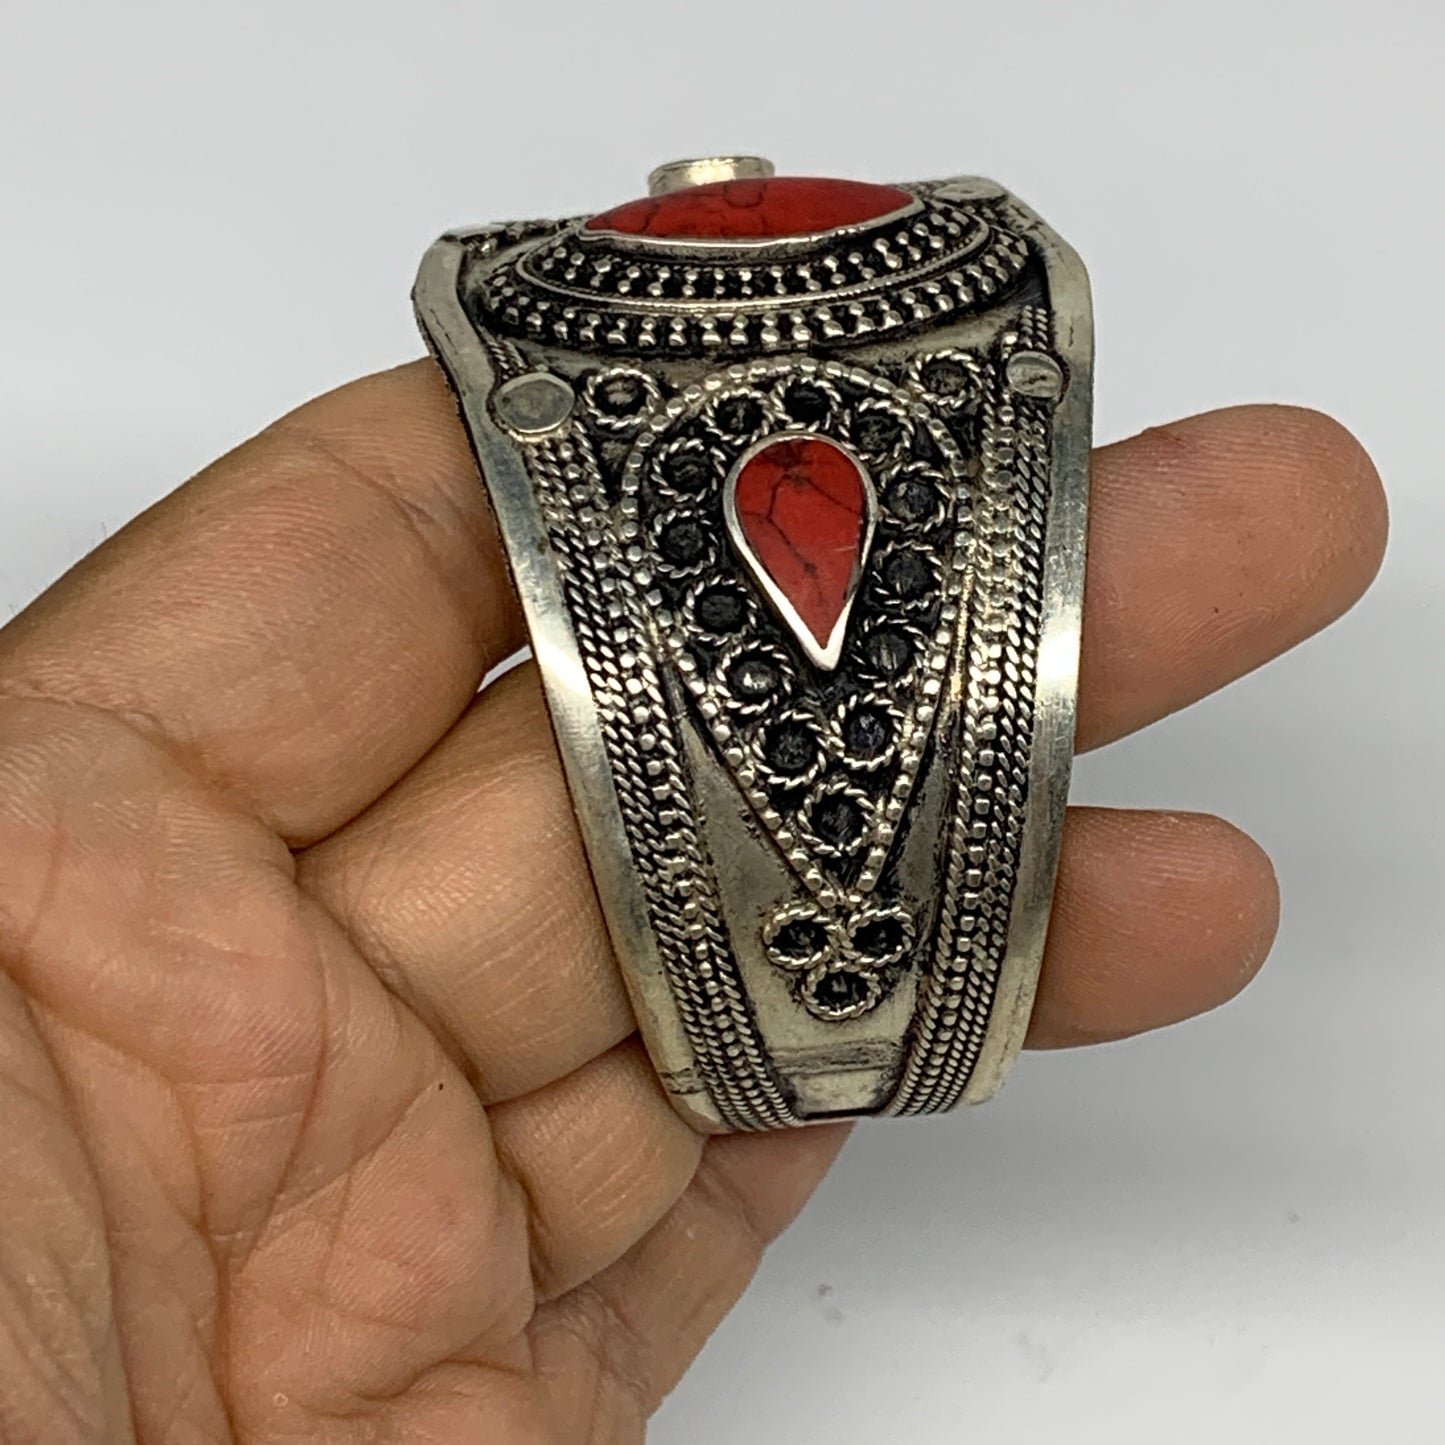 34.6g, 1.6" Turkmen Cuff Bracelet Tribal Small Marquise, Red Coral Inlay, B13499